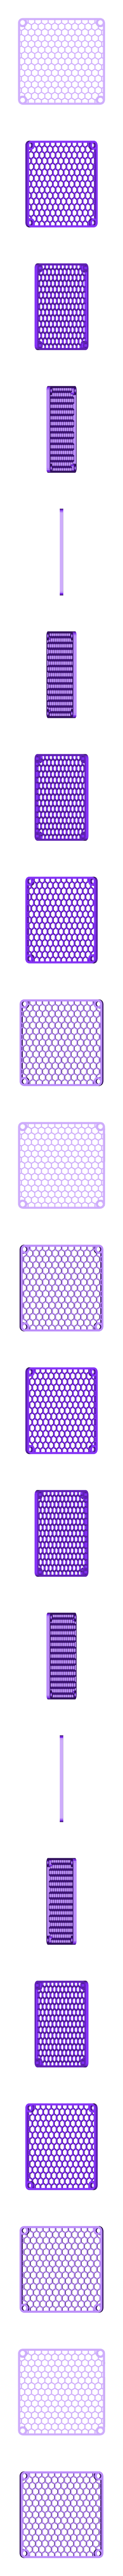 80mm_honeycomb_reduced_fan_cover.stl Download free STL file Customizable Fan Grill Cover • 3D print design, MightyNozzle